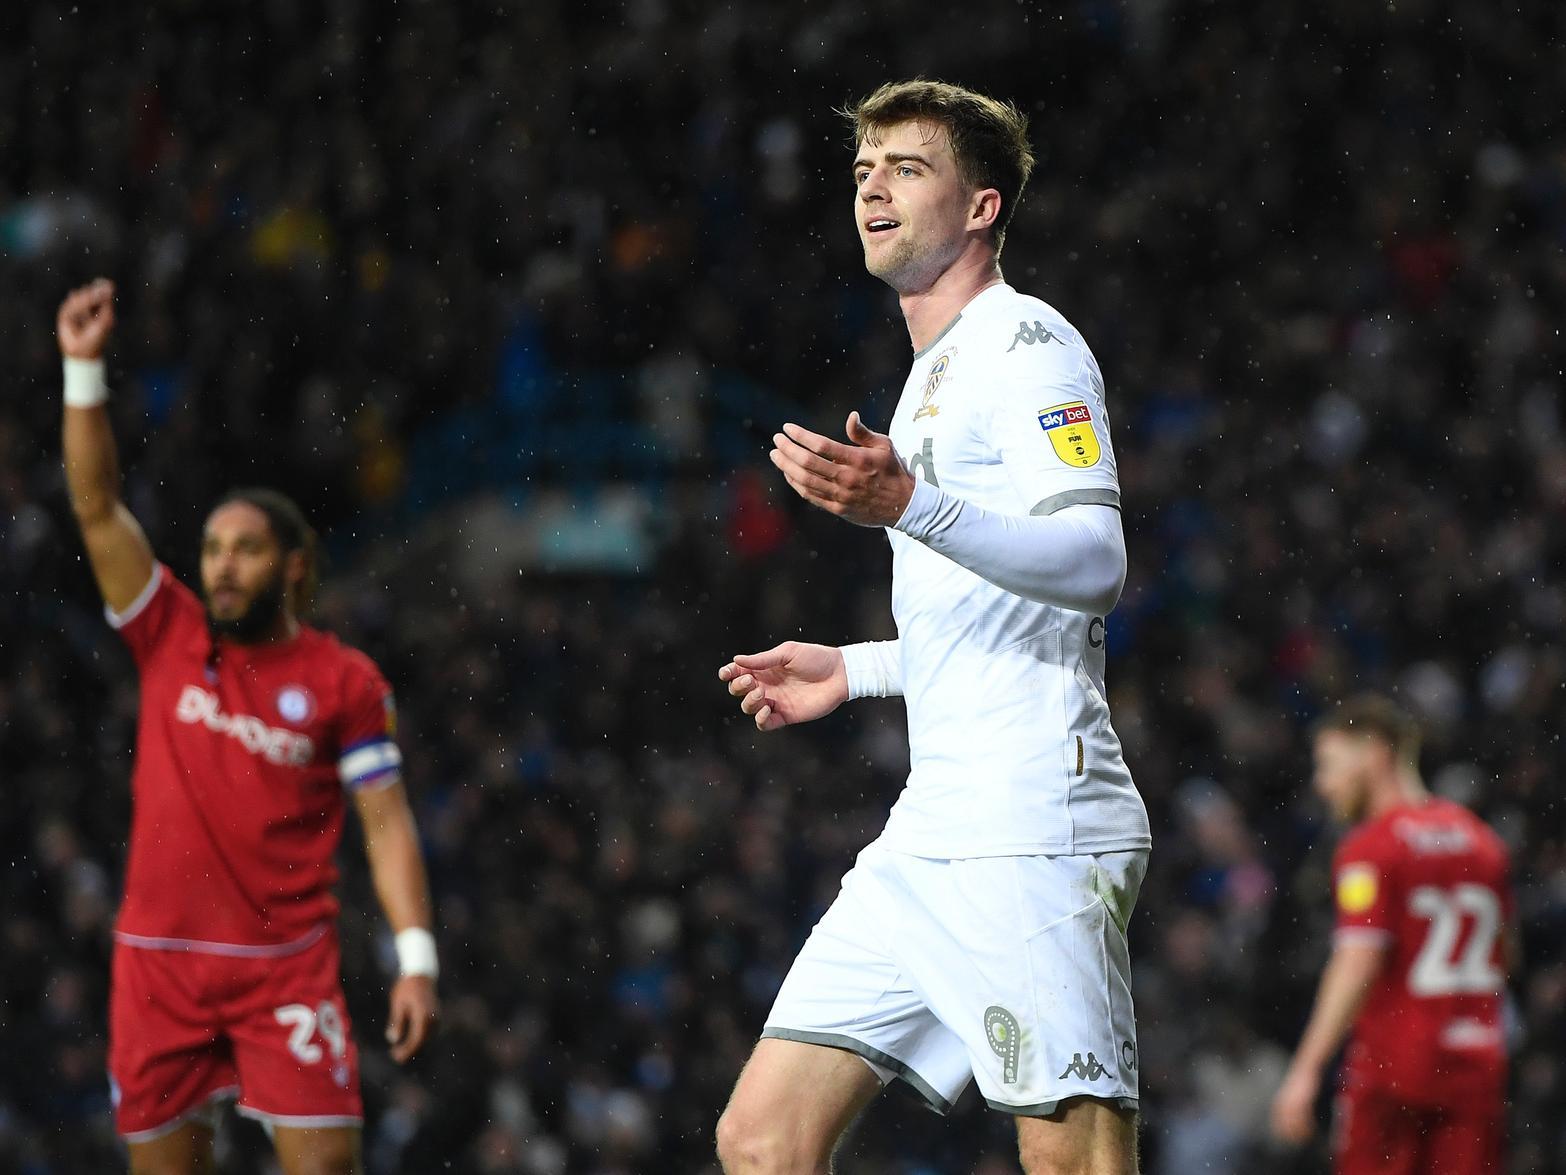 Leeds boss Marcelo Bielsa has refused to criticise Patrick Bamford for his recent struggles in front of goals, suggesting that he's more focused on the positives of his side's attacking intent. (Football League World)